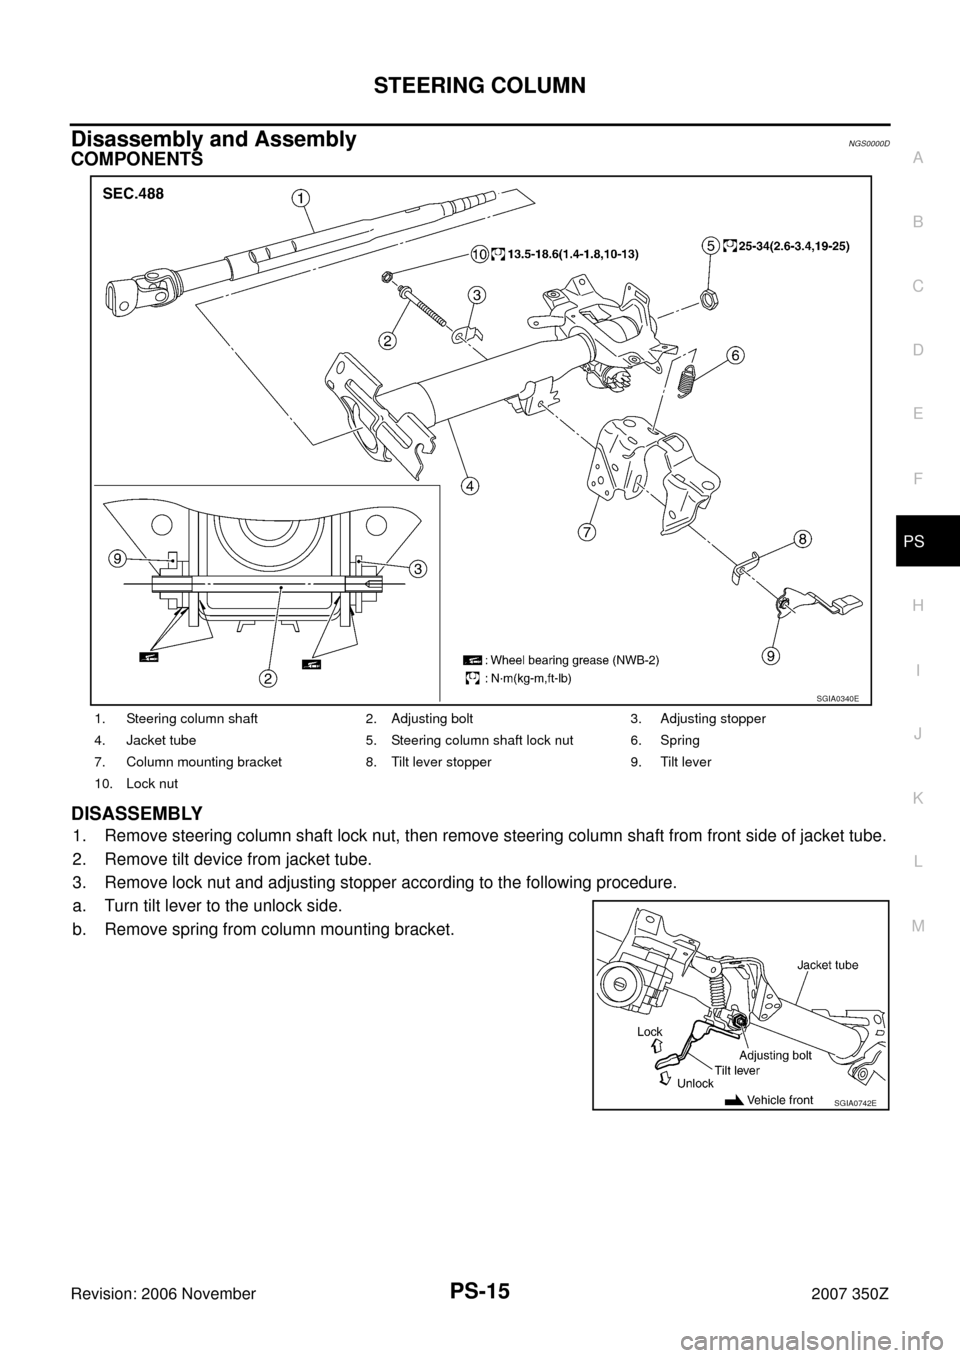 NISSAN 350Z 2007 Z33 Power Steering System User Guide STEERING COLUMN
PS-15
C
D
E
F
H
I
J
K
L
MA
B
PS
Revision: 2006 November2007 350Z
Disassembly and AssemblyNGS0000D
COMPONENTS
DISASSEMBLY
1. Remove steering column shaft lock nut, then remove steering 